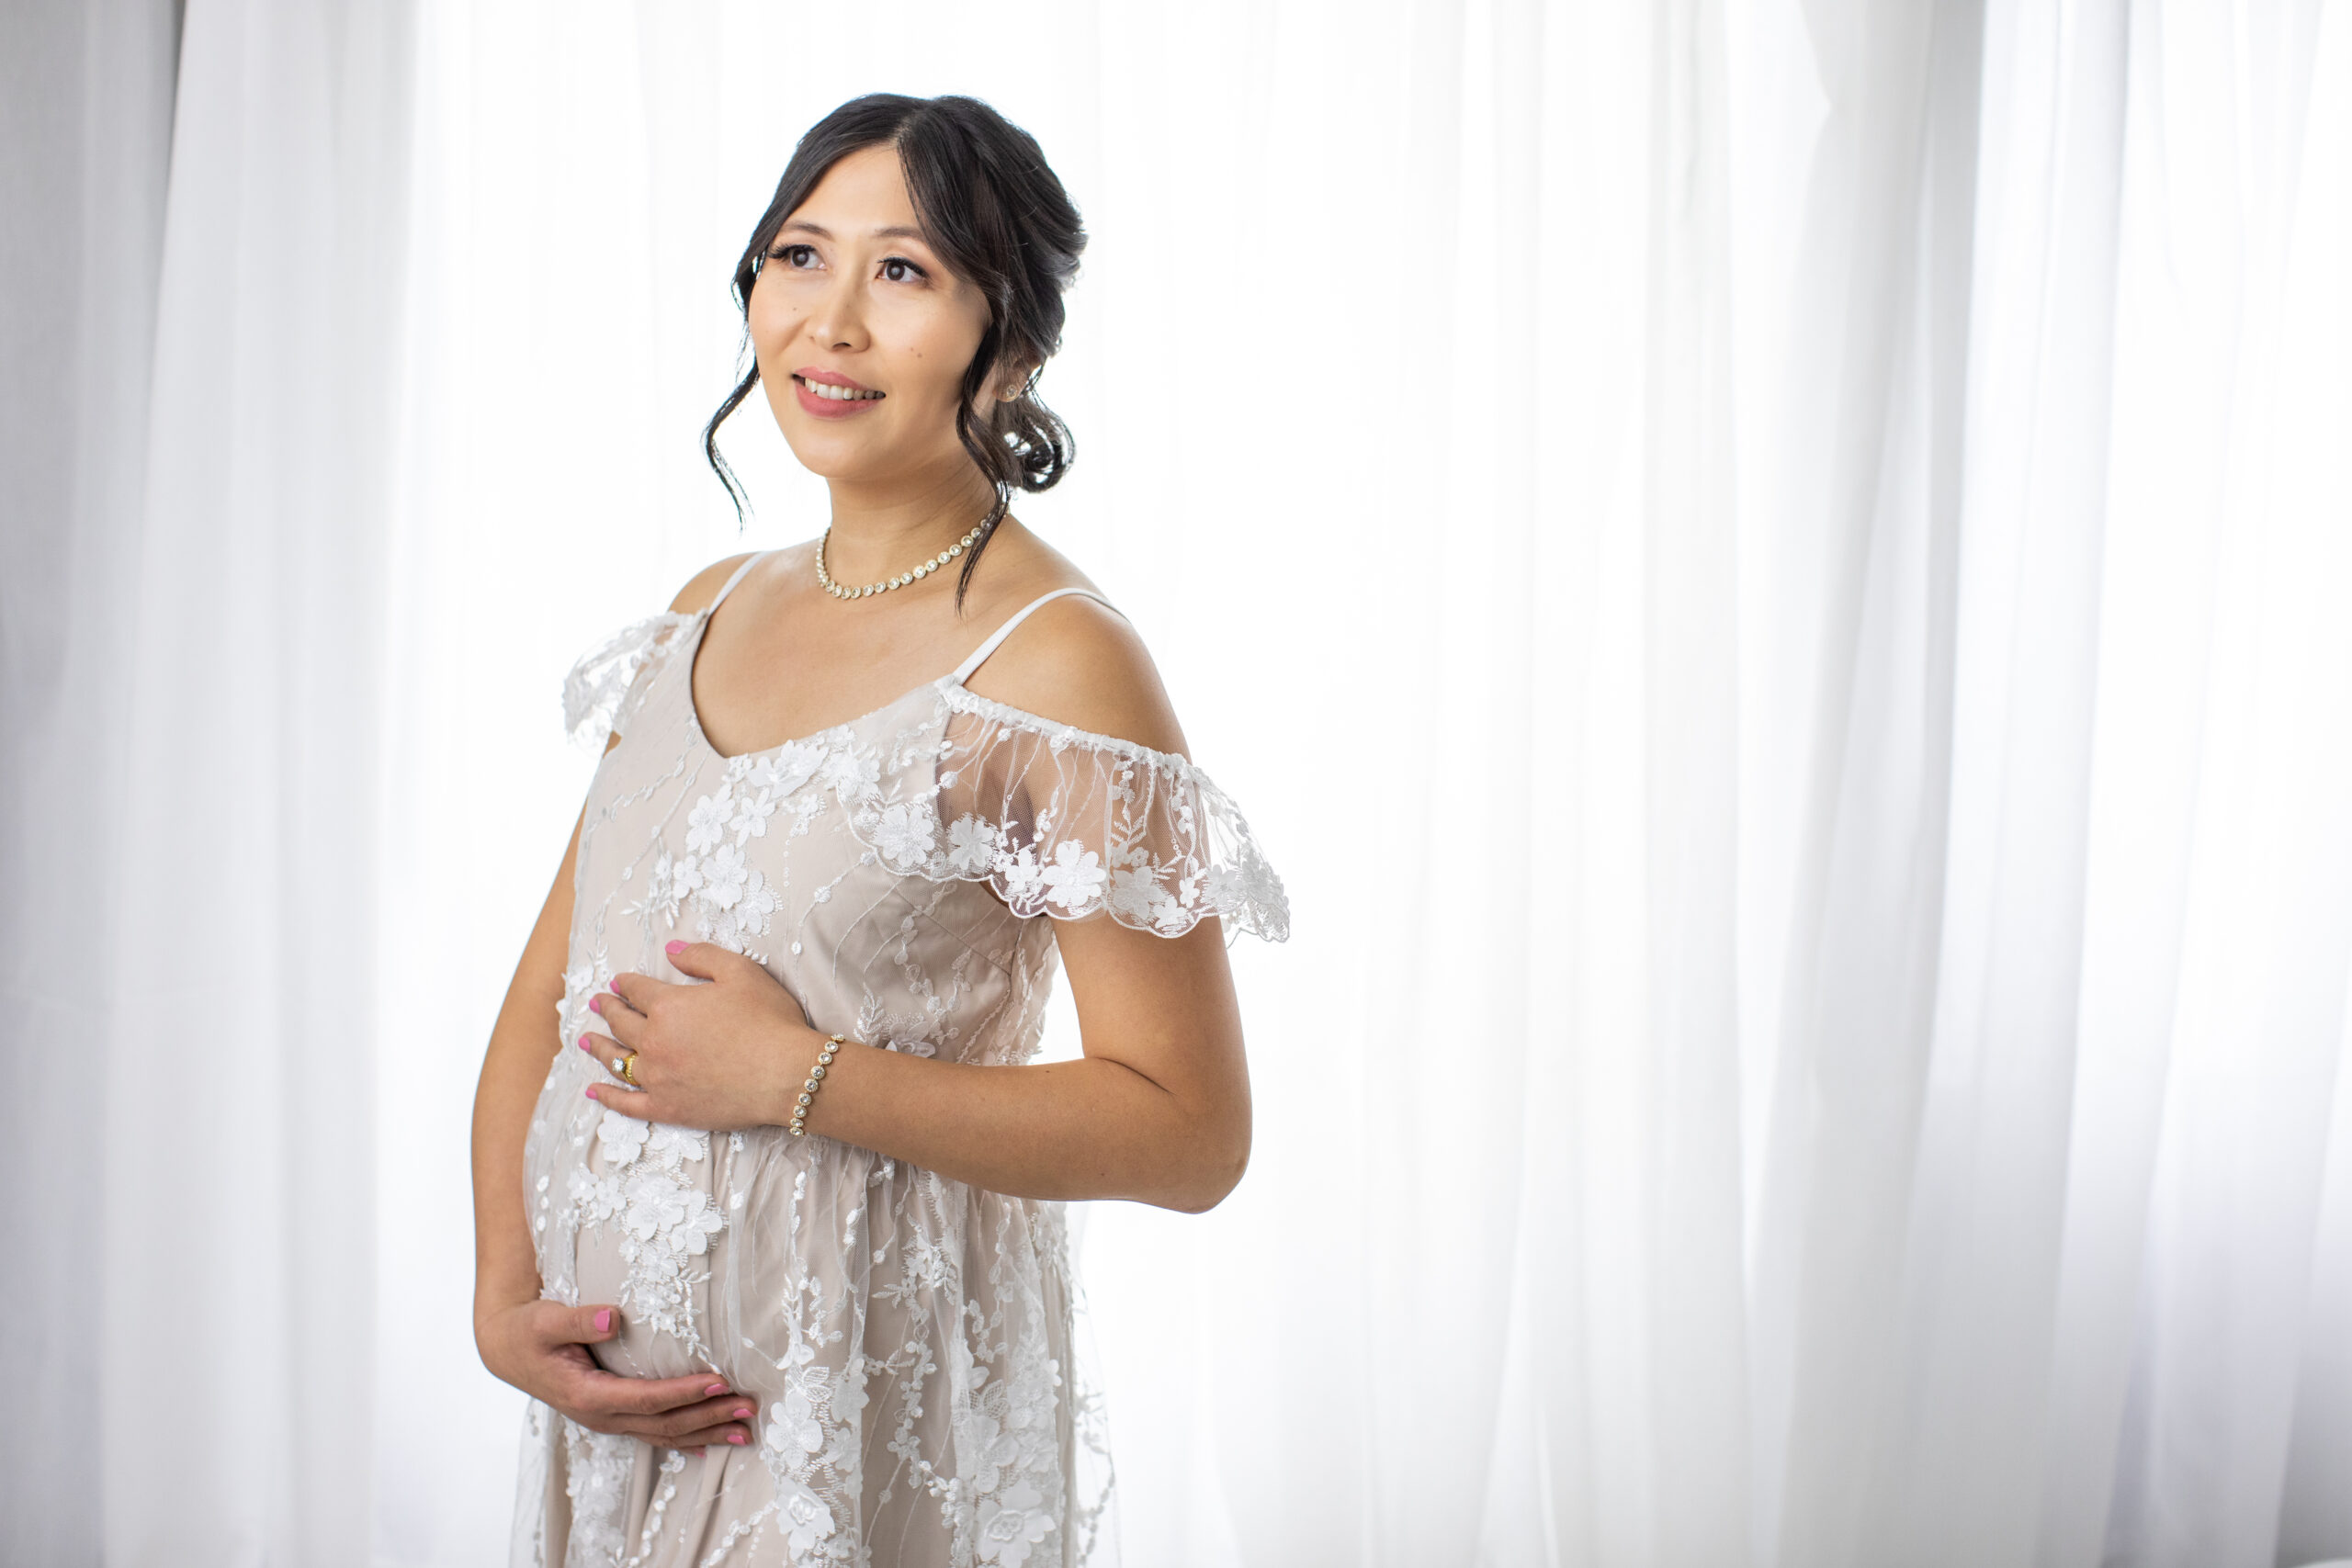 Studio maternity portrait in Pink Blush lace gown on back lit white background.